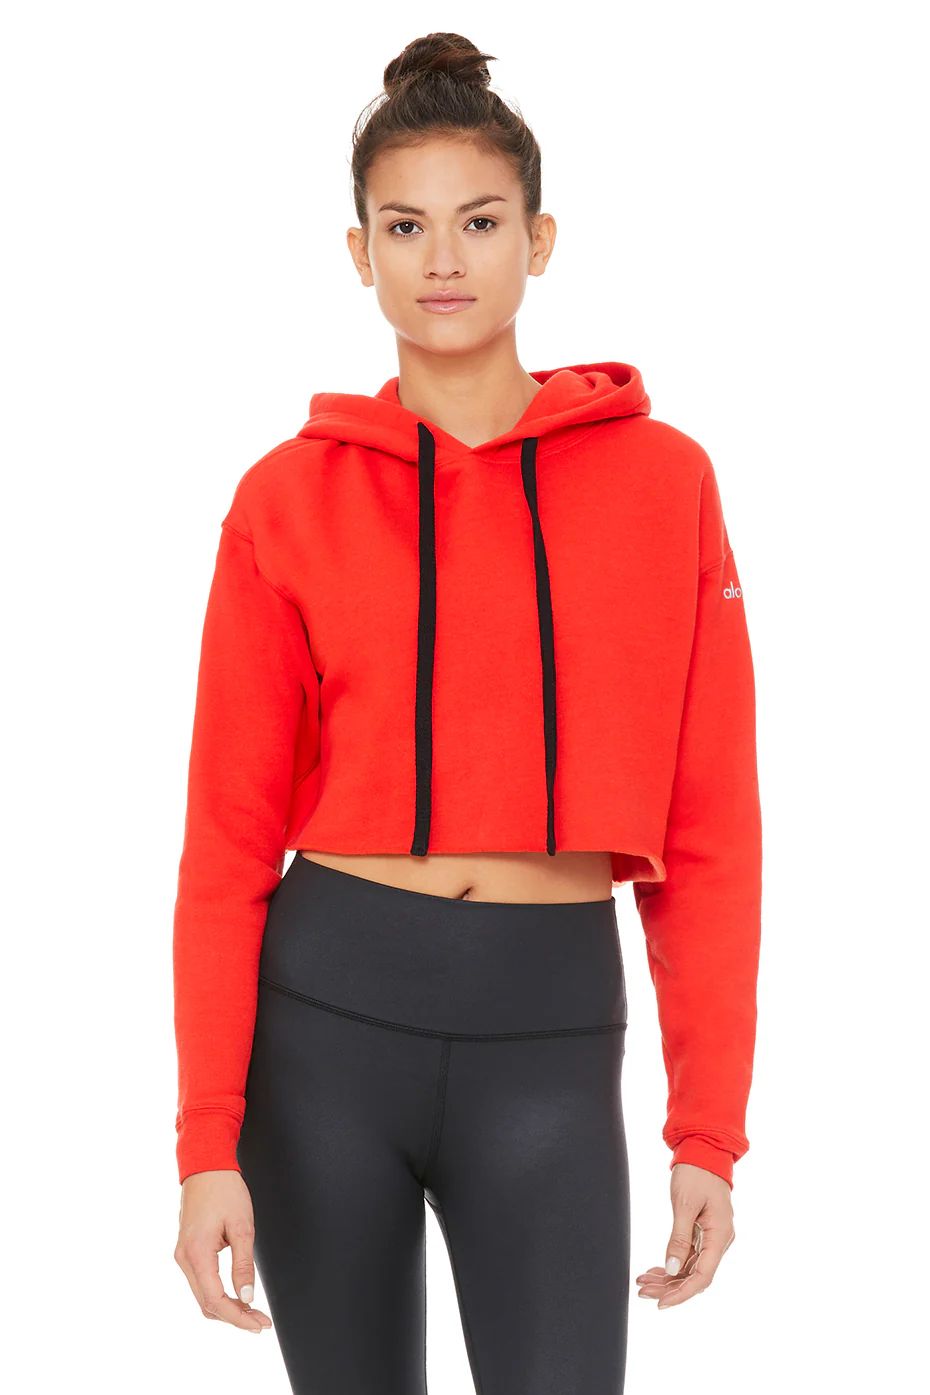 Limited-Edition Exclusive Cropped Hoodie | Alo Yoga